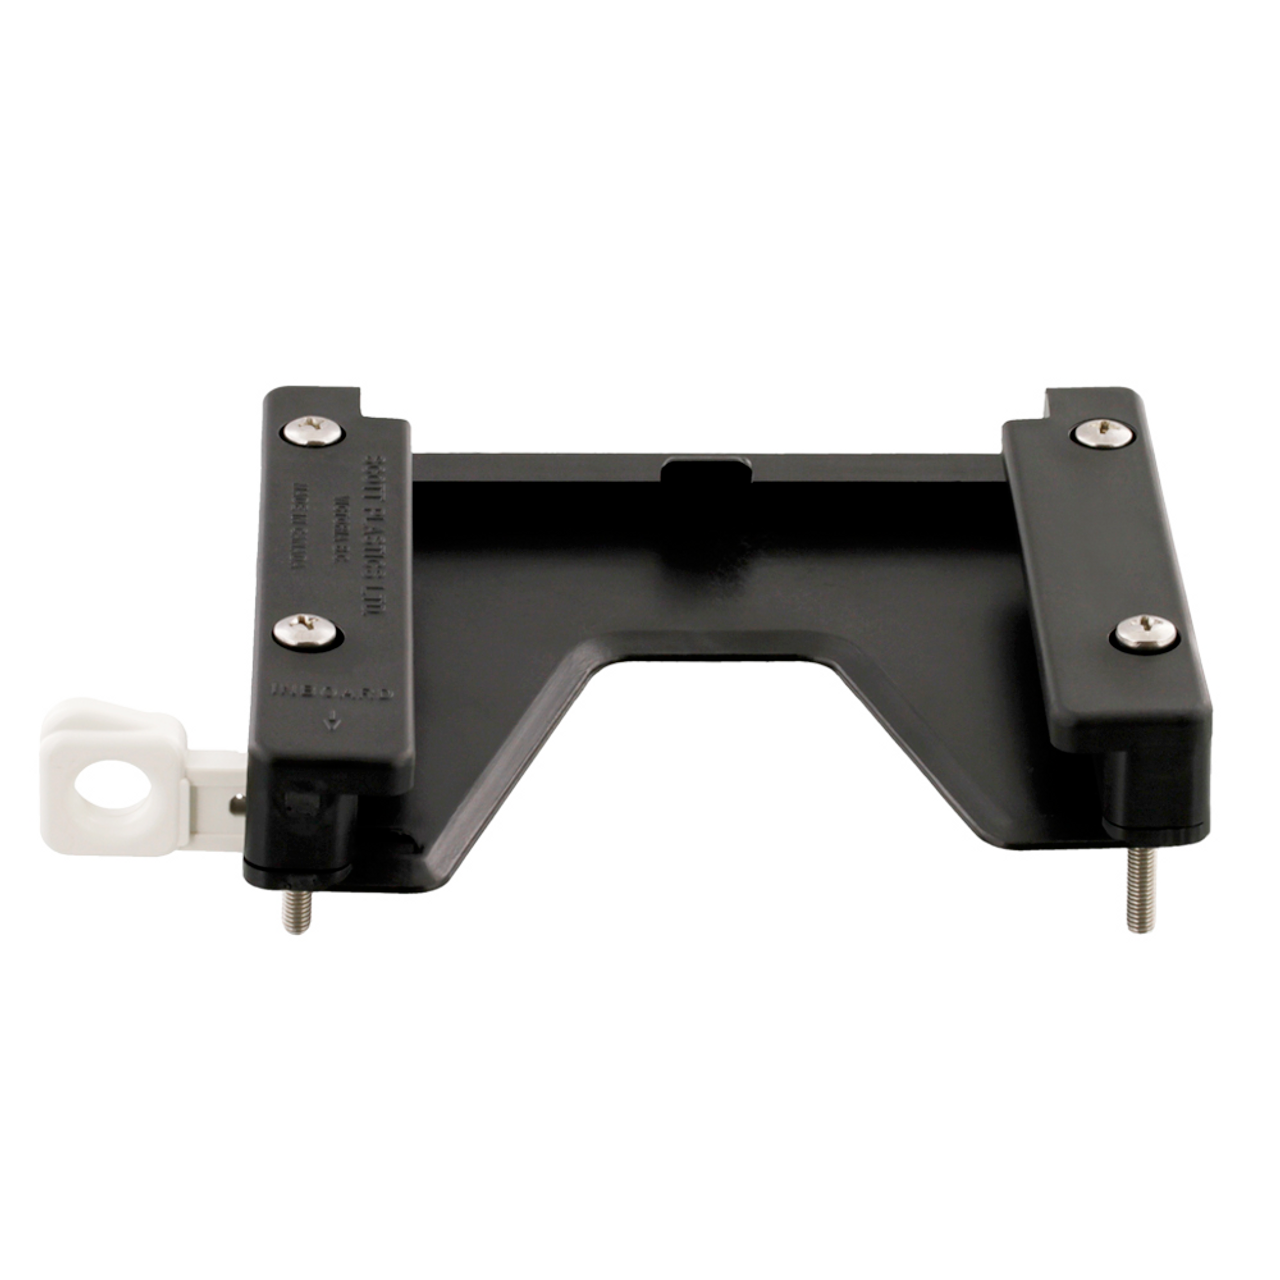 Scotty Mounting Bracket for Model 1050 and 1060 Scotty Downriggers